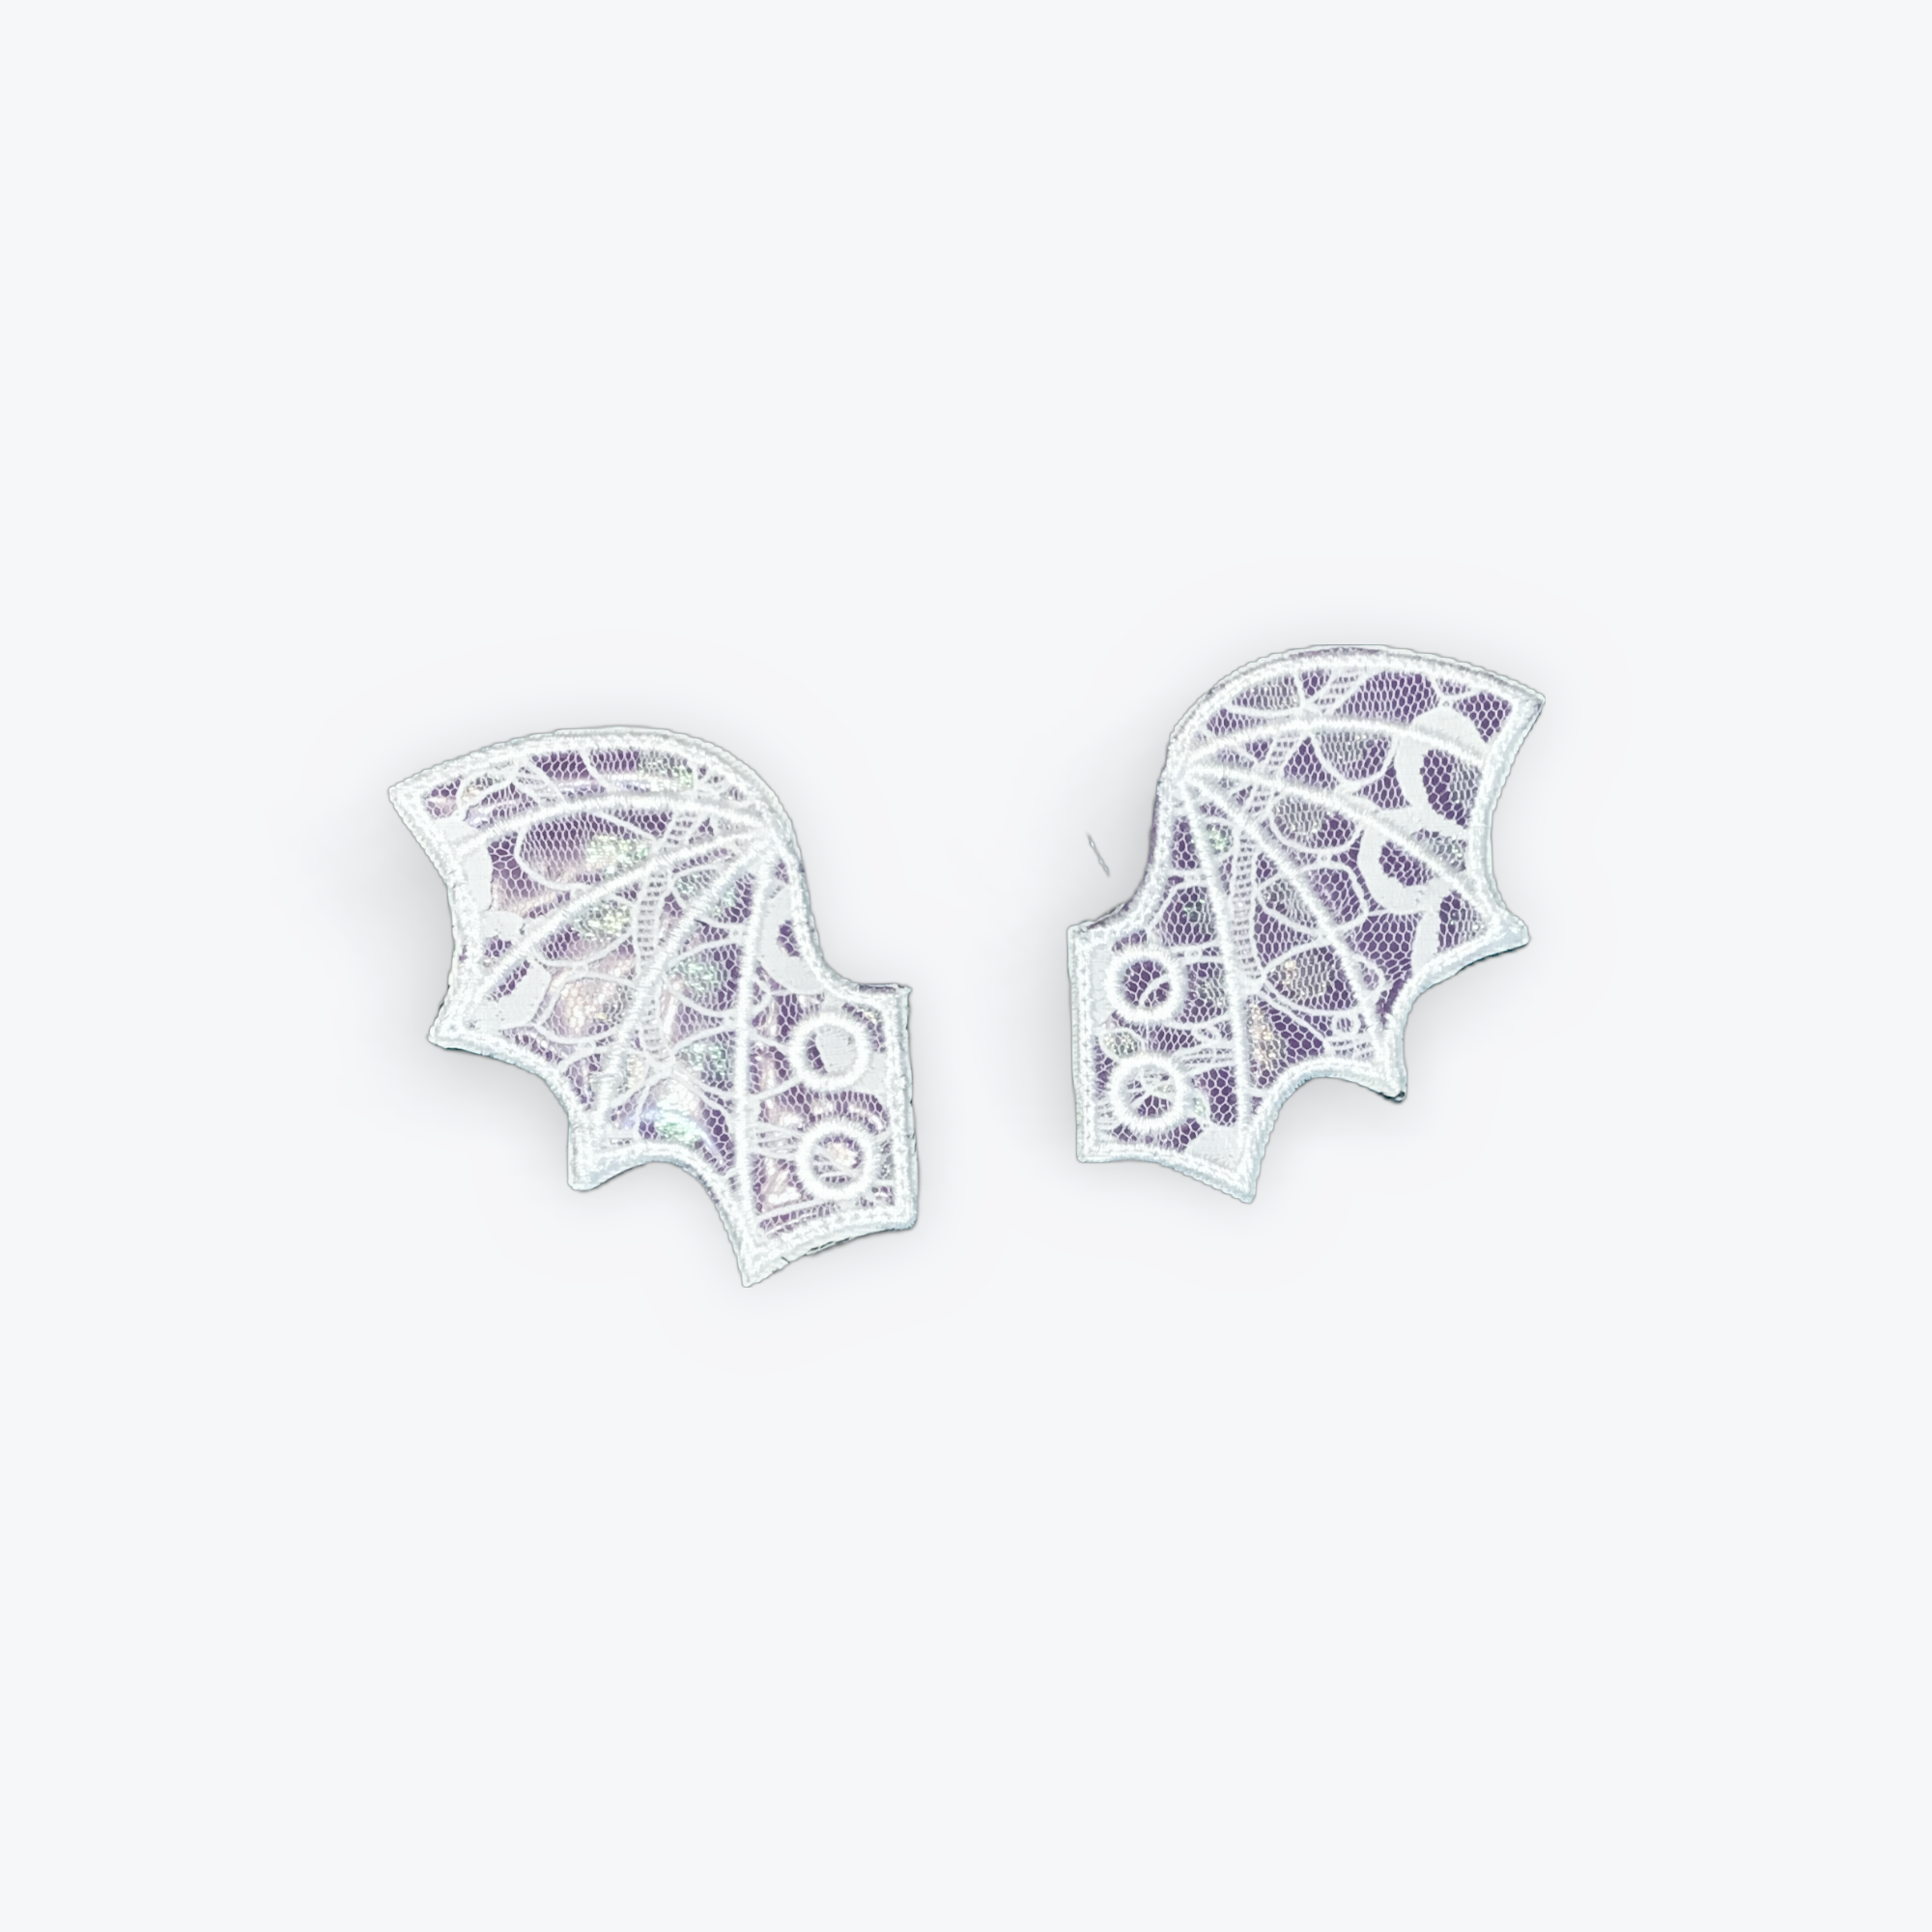 Embroidered Shoe Wings